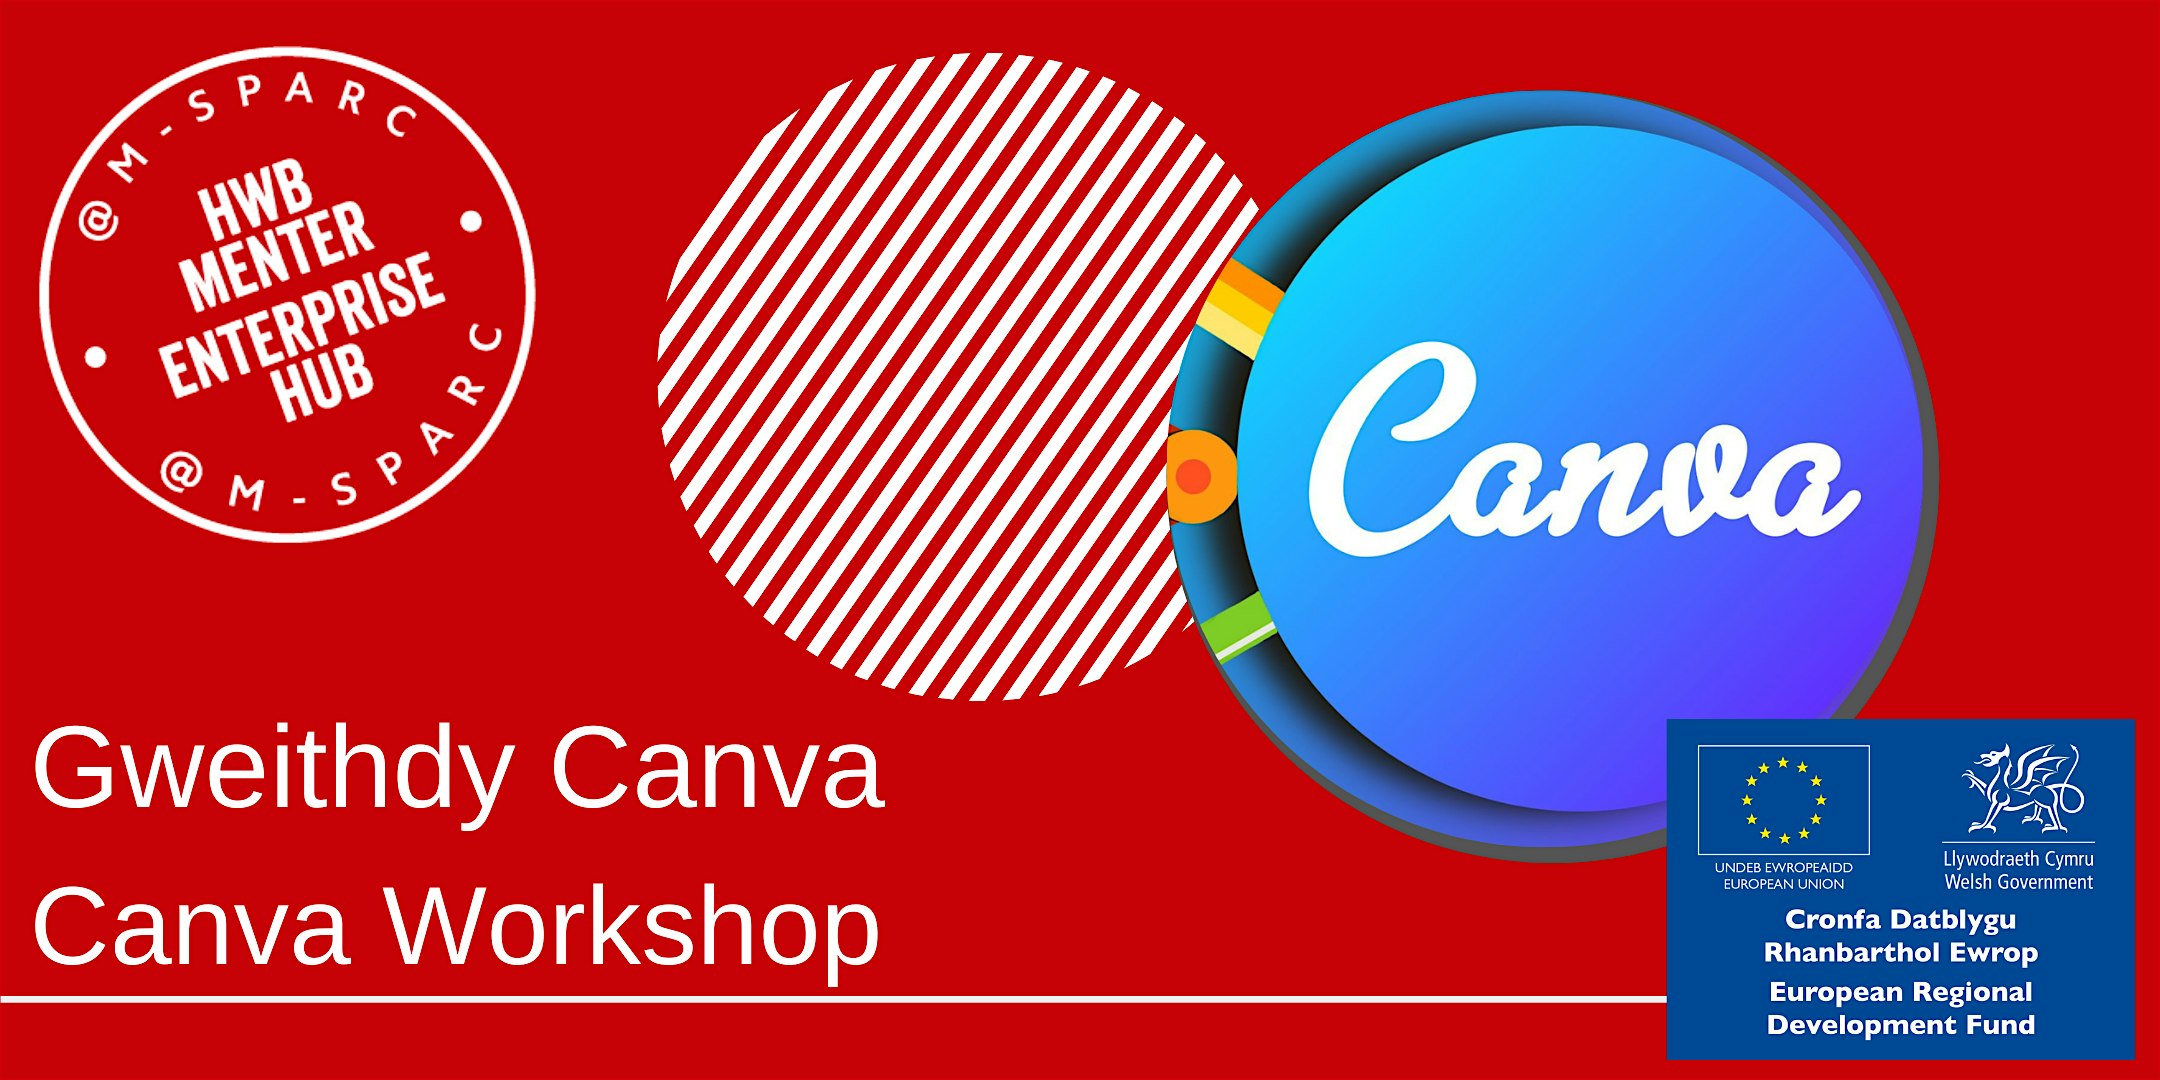 IN PERSON- Gweithdy Canva / Canva  Workshop